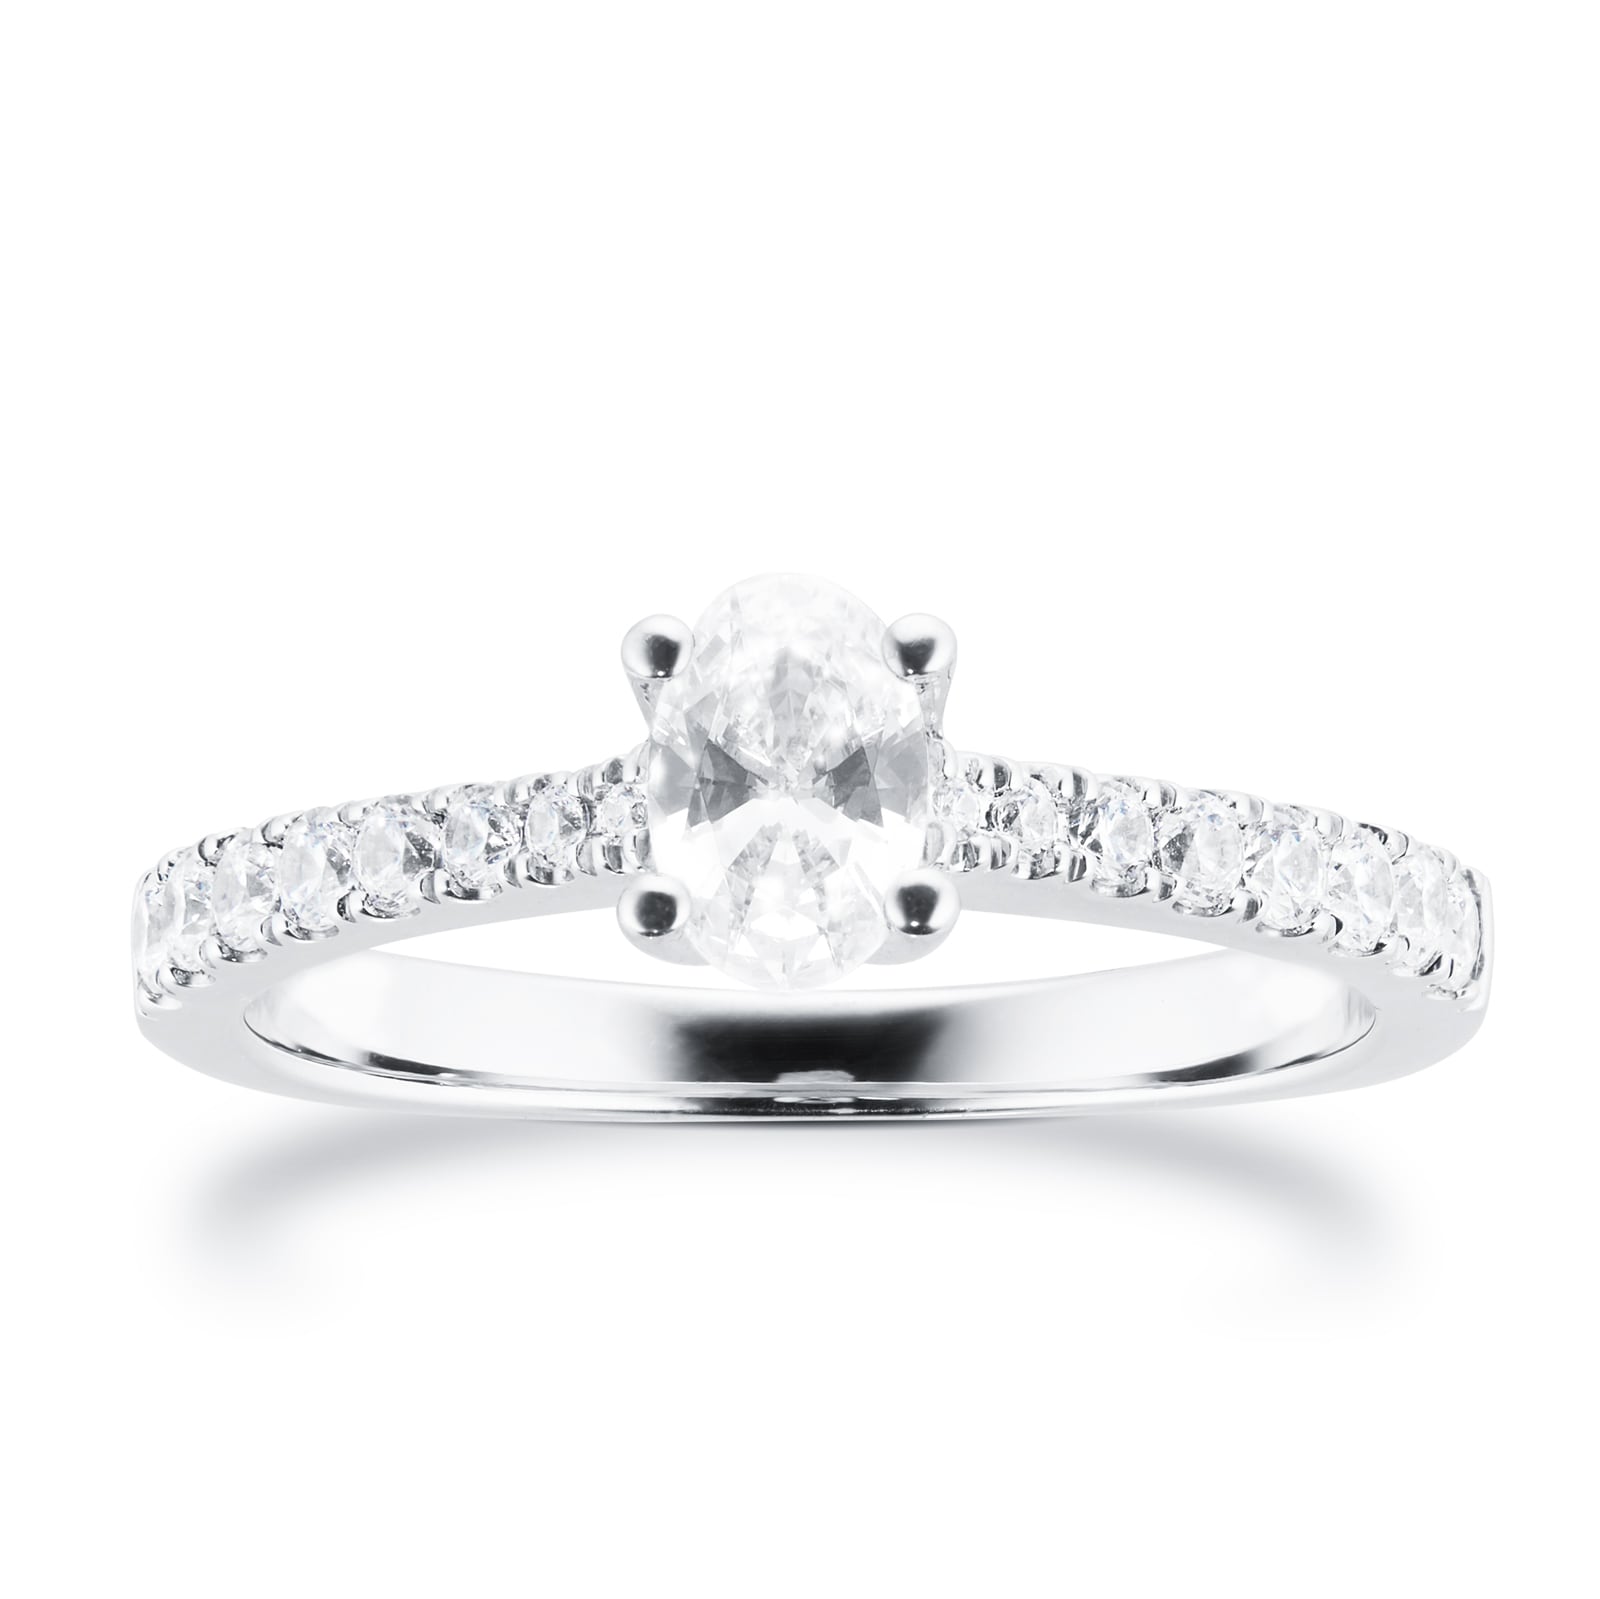 Platinum 0.70cttw Goldsmiths Brightest Diamond Oval Cut Solitaire Engagement Ring - Ring Size Q